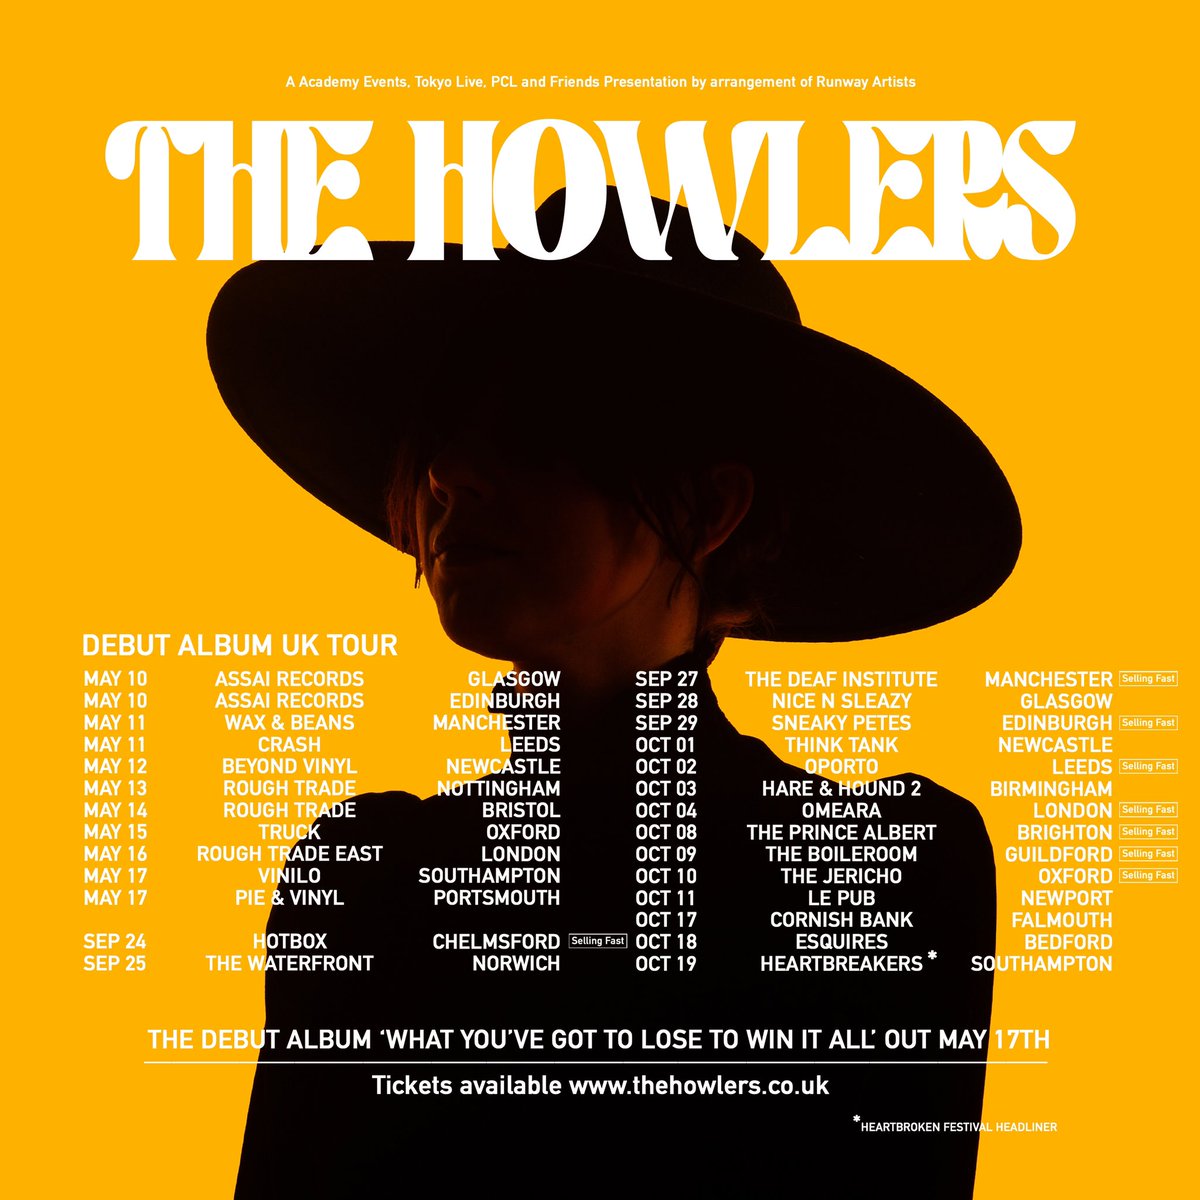 Don’t be last minute Larry, get a ticket early for our debut album tour, alot of dates are selling fast! And it’s only week 1: linktr.ee/thehowlersuk Not so fun fact, It’s pretty common for 80% of ticket sales to happen 2 weeks before a show these days (yep it’s a pain), which